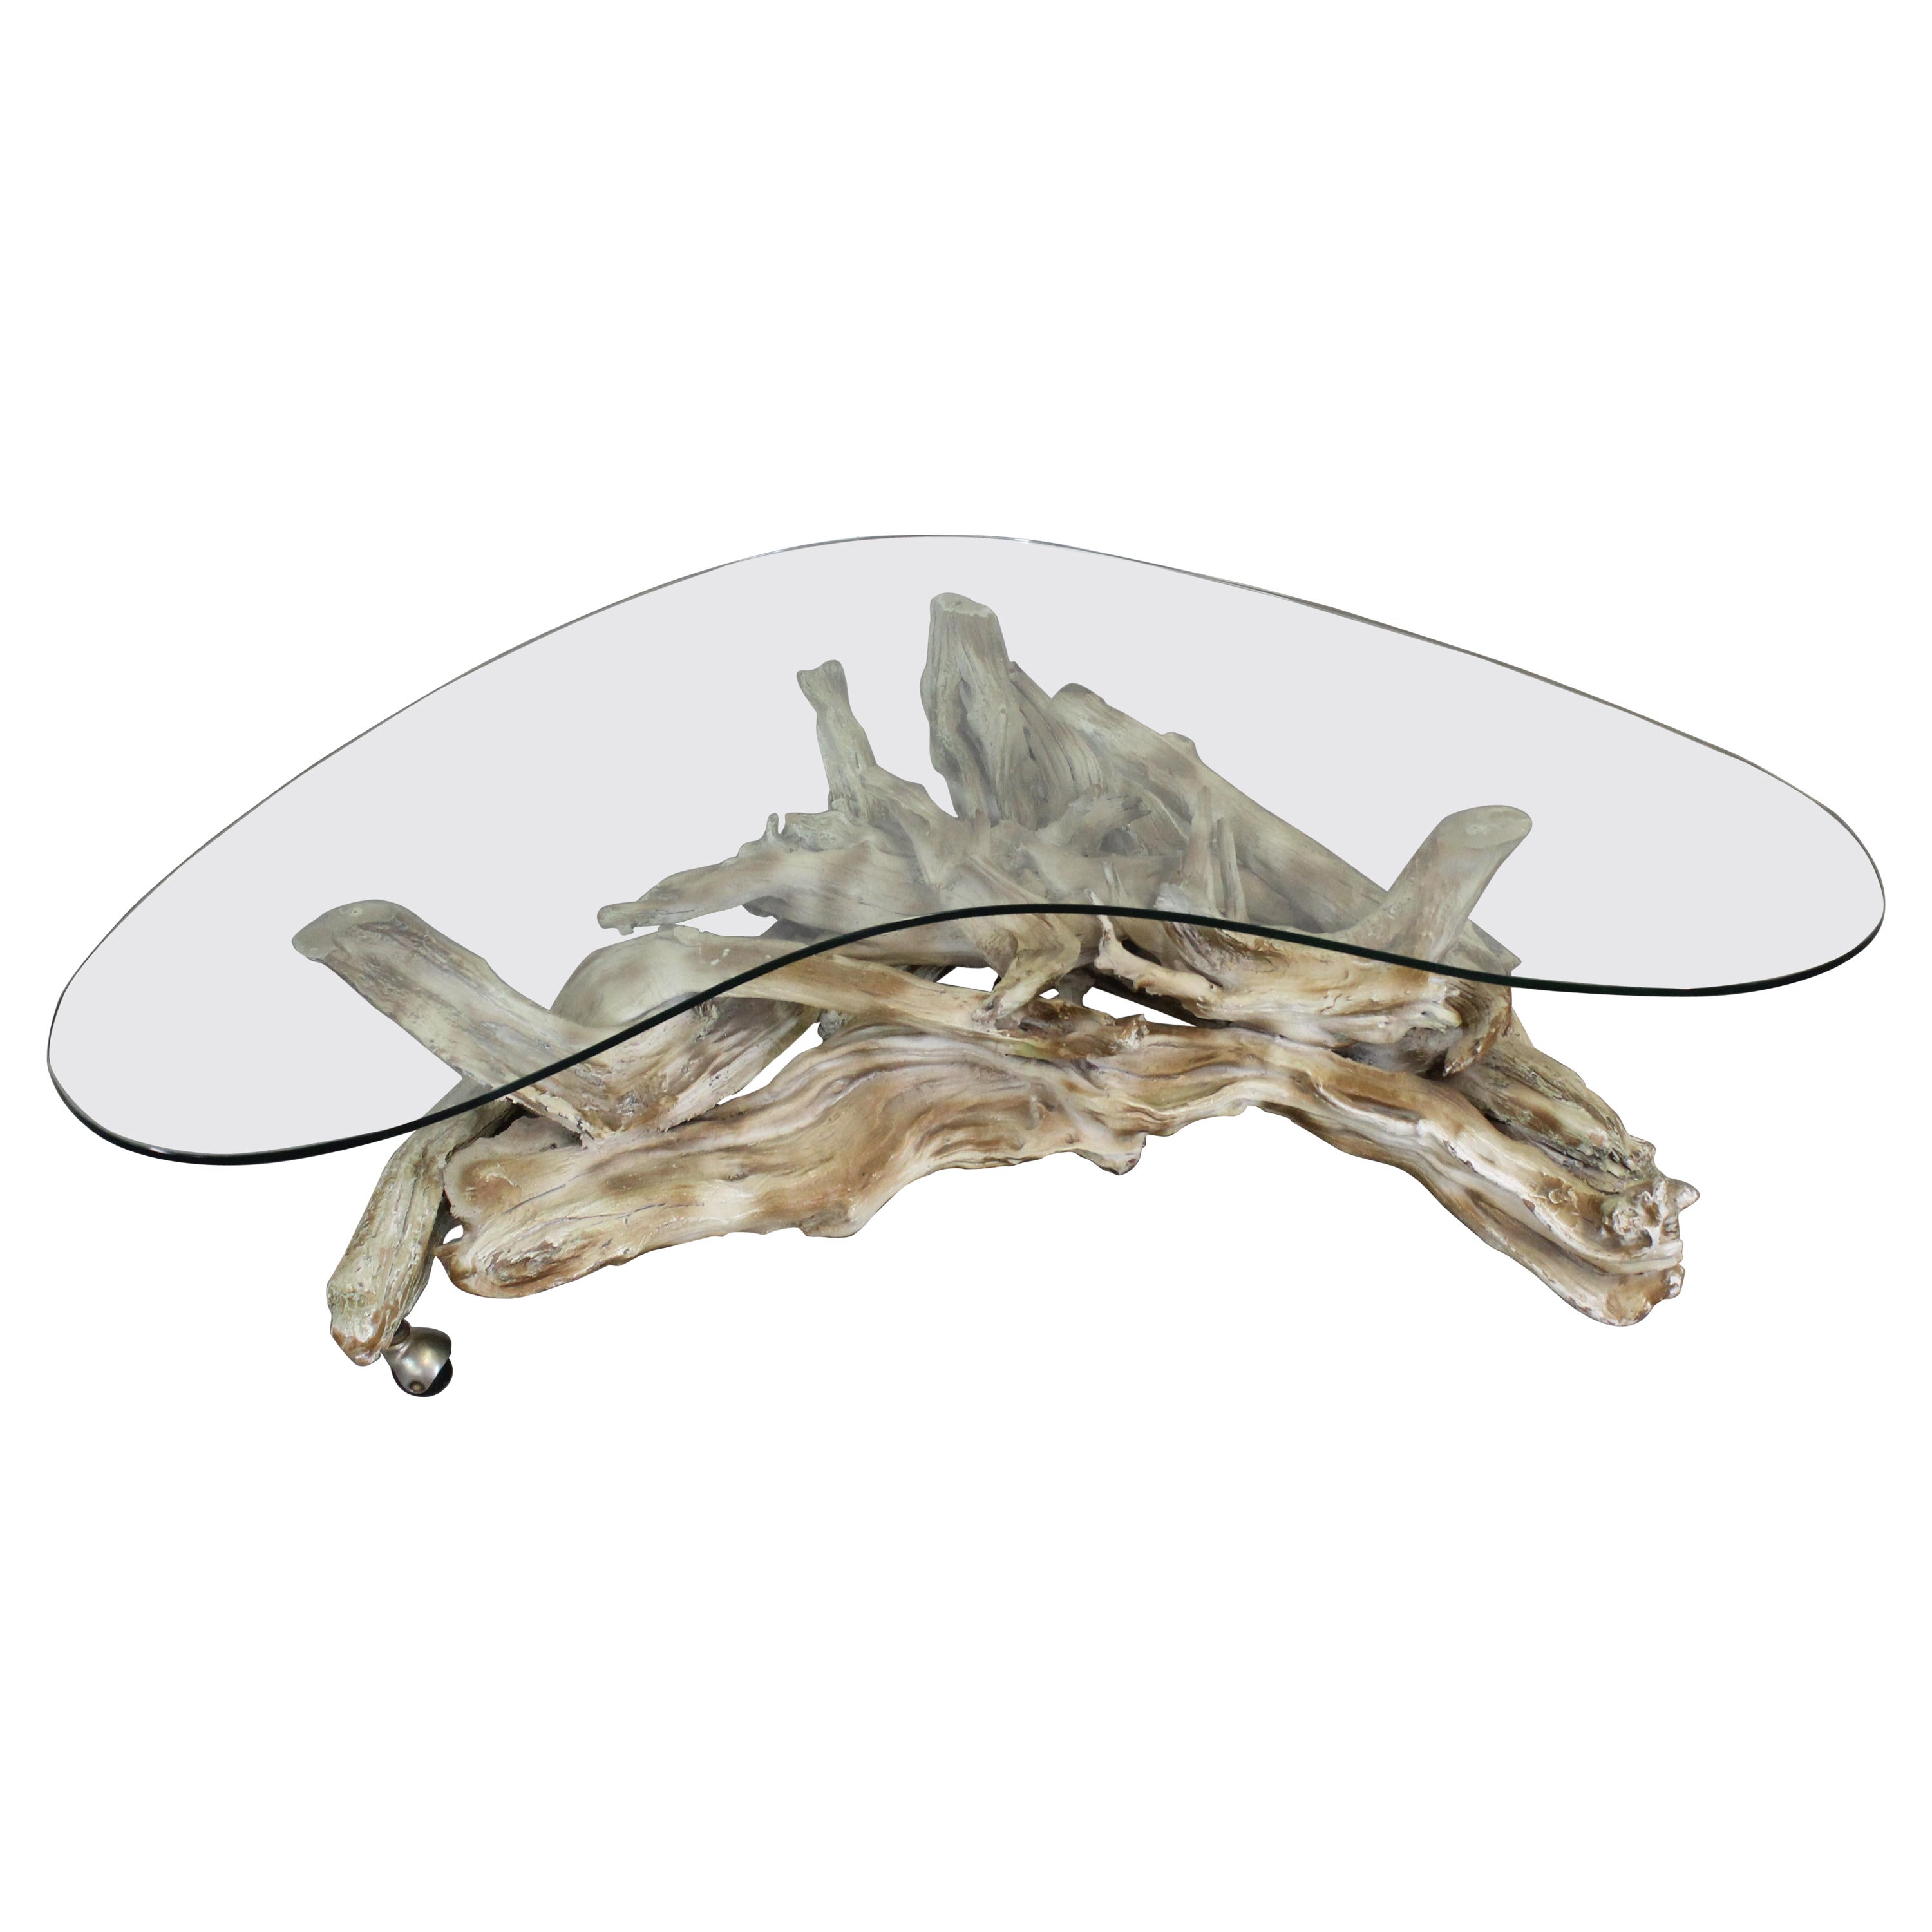 Vintage Mid-Century Modern Amorphous/Biomorphic Glass Driftwood Coffee Table For Sale